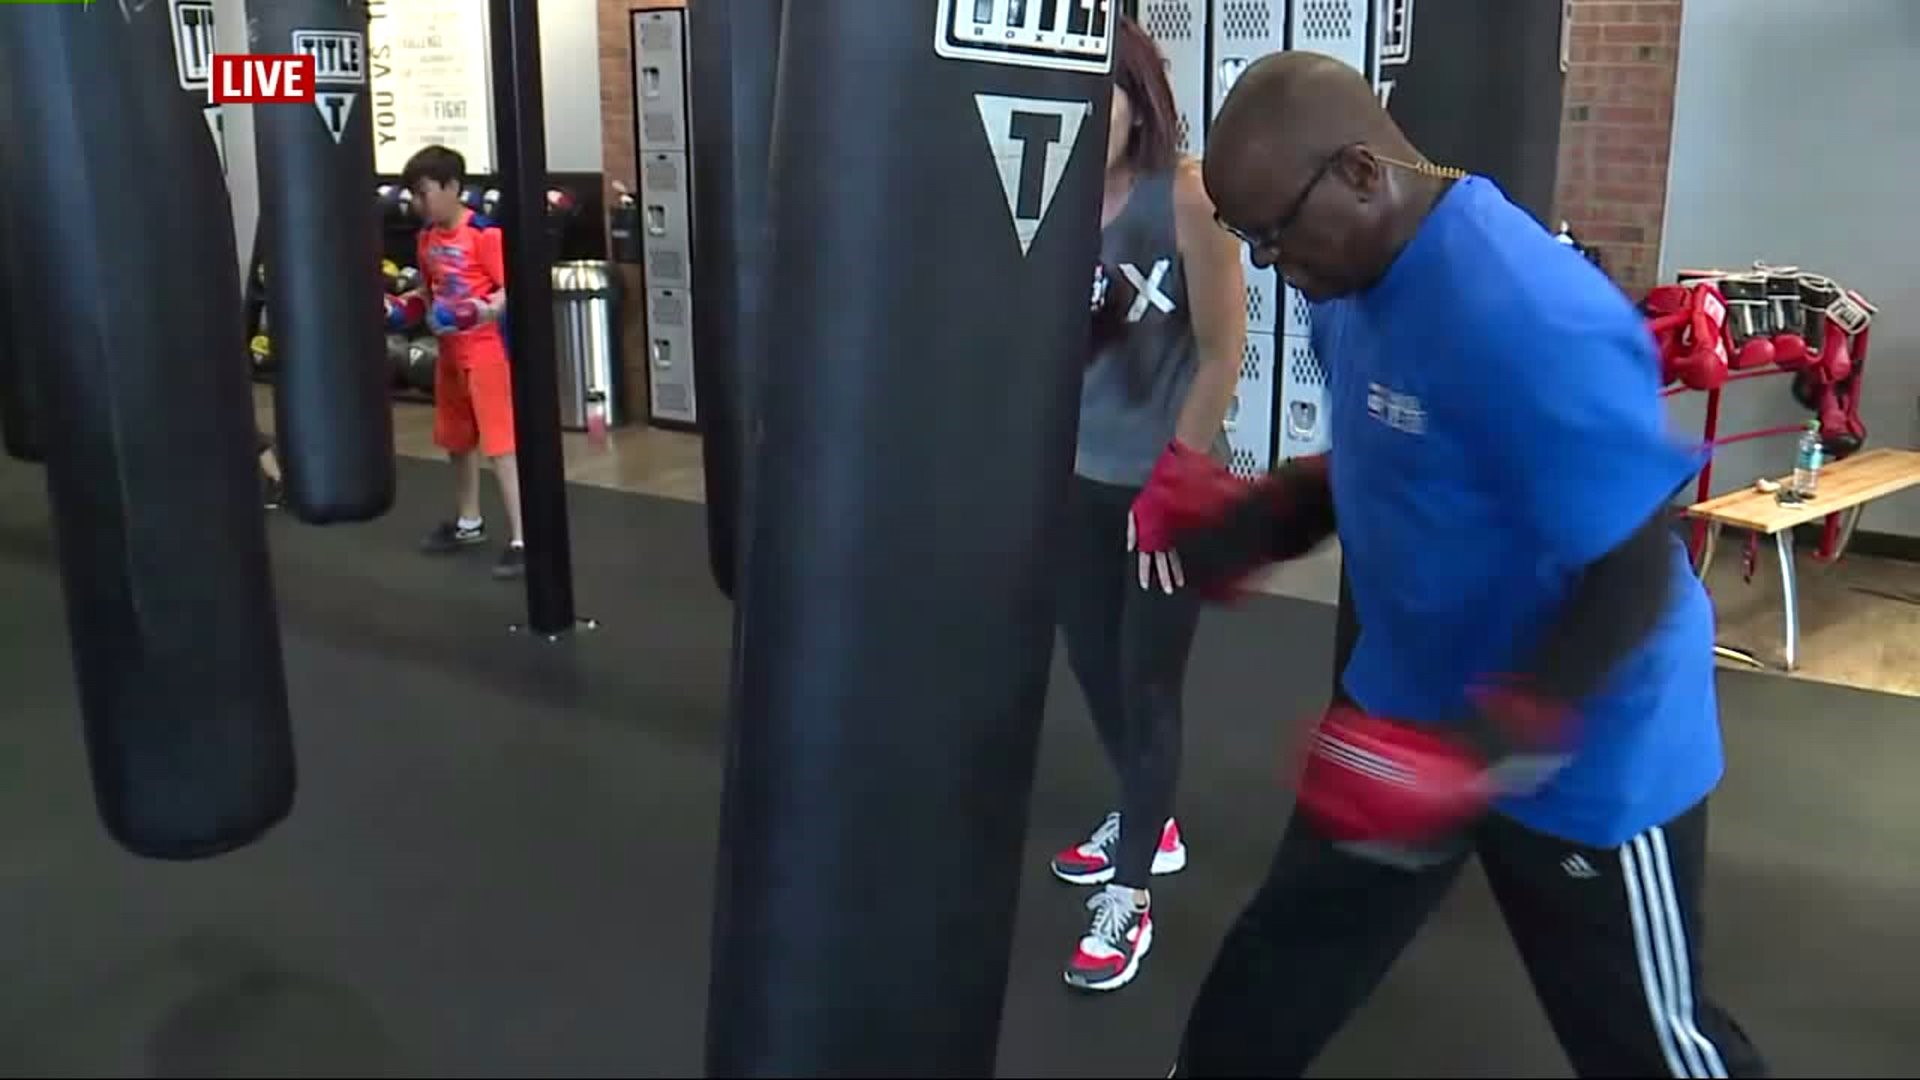 Learn some moves in the ring at Title Boxing Club